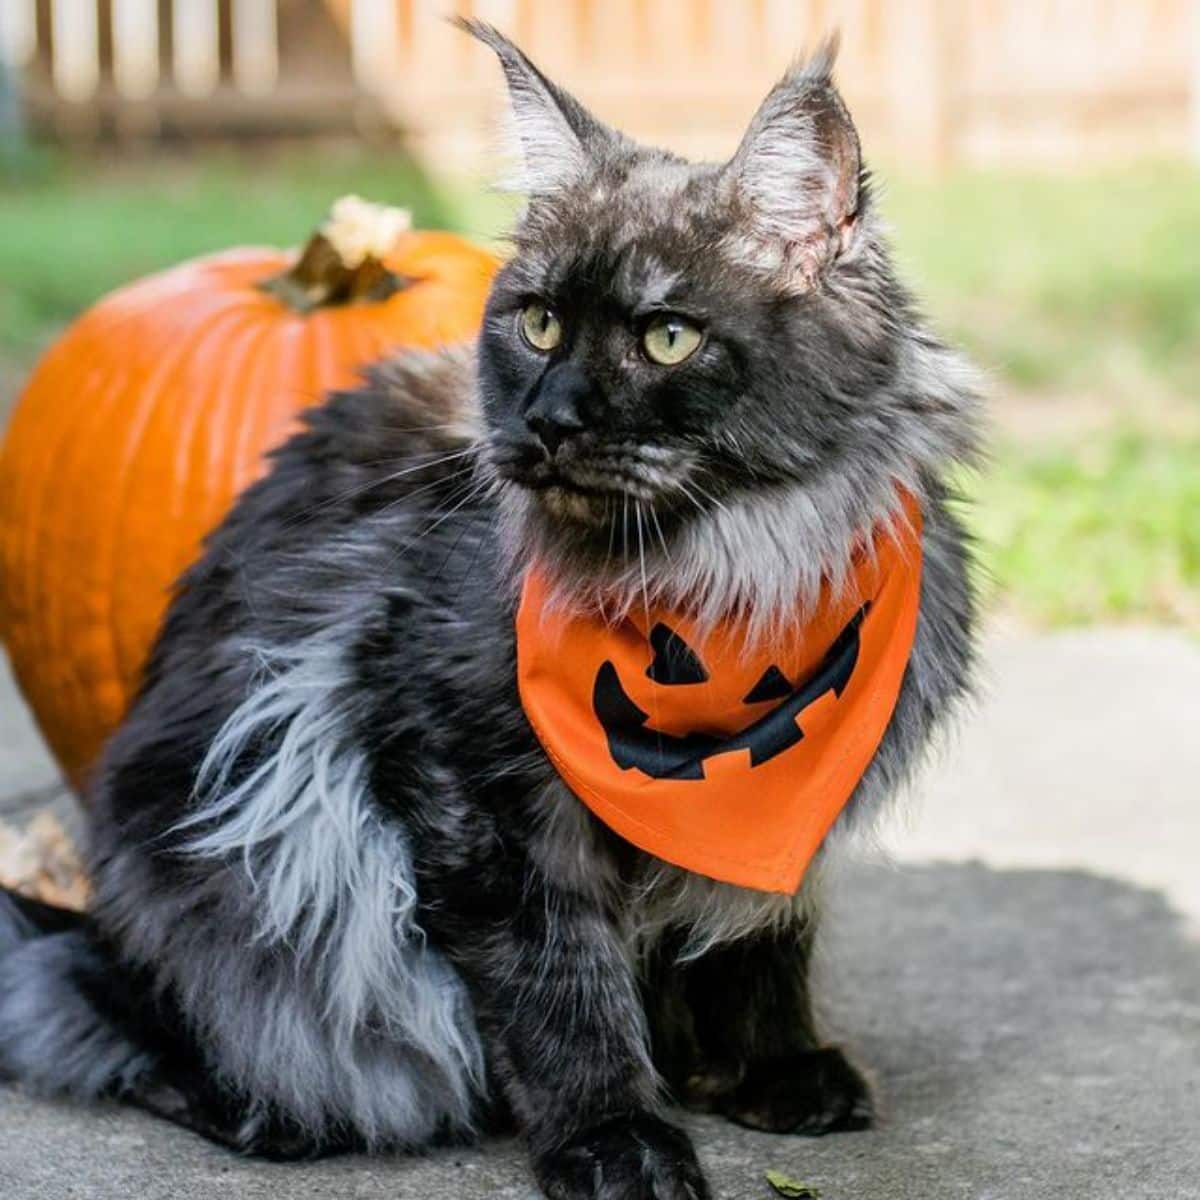 A fluffy gray maine coon with a halloween scarf sitting on a concrete pavement near a pumpkin.